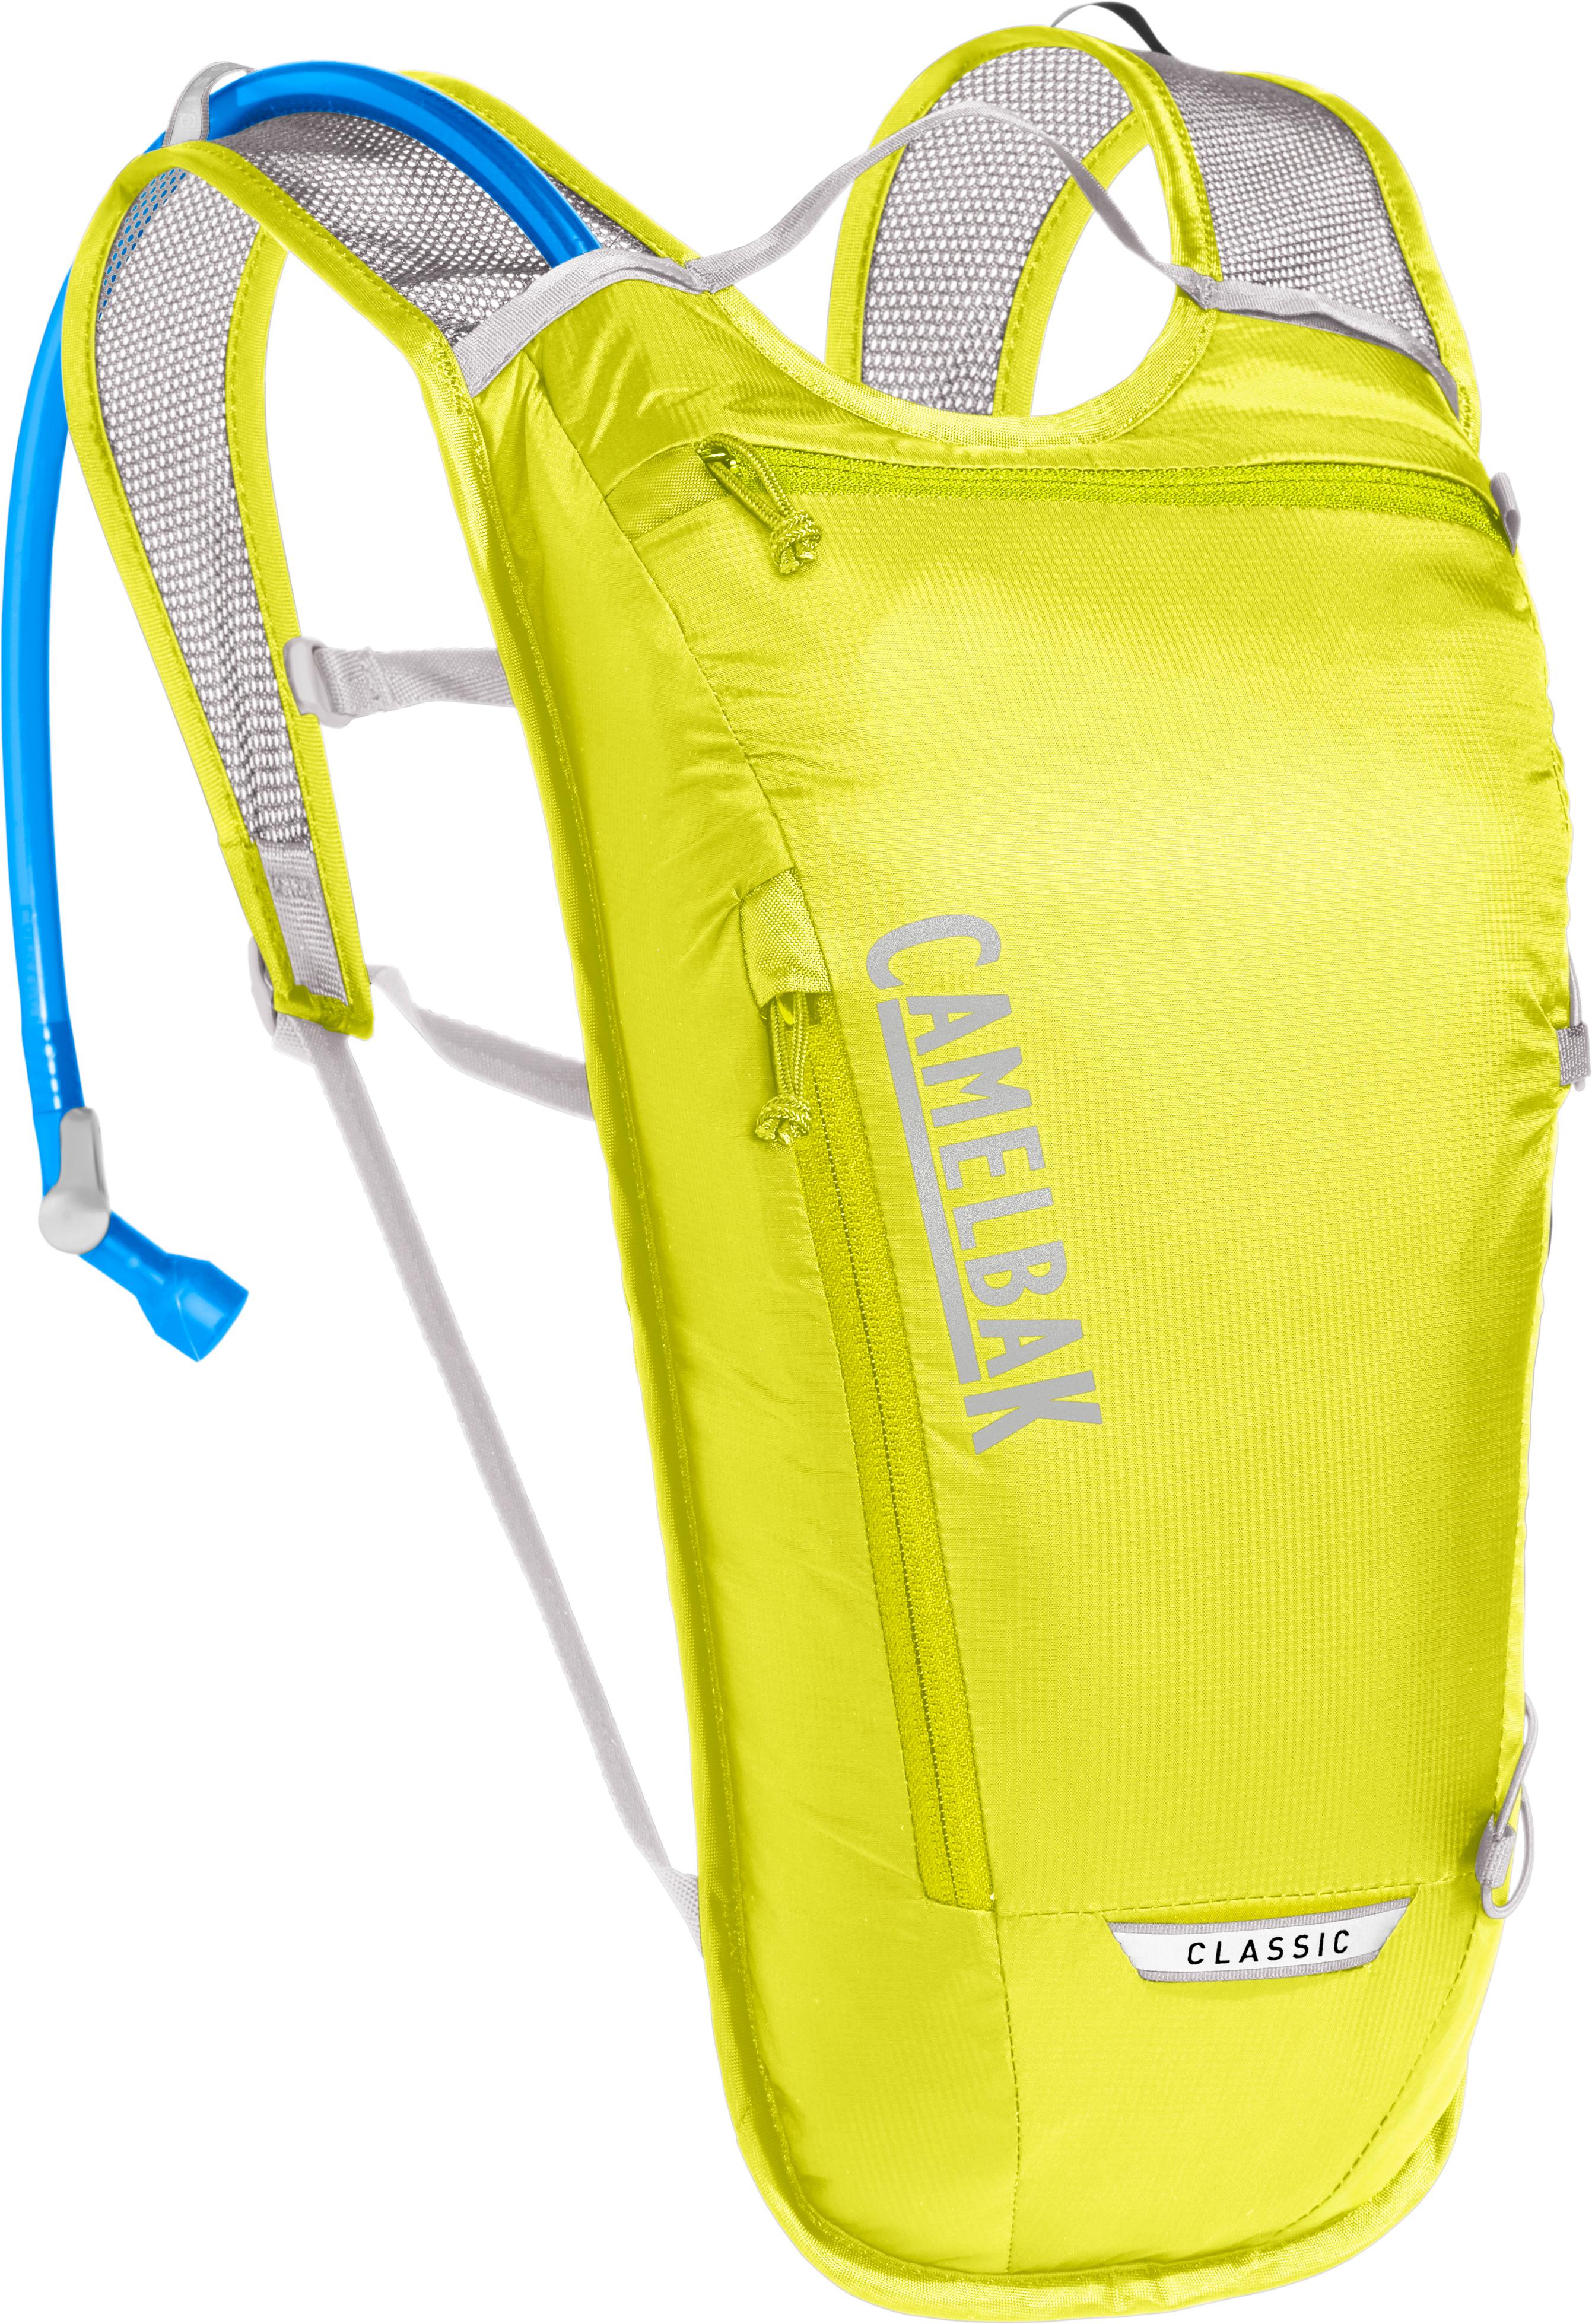 Camelbak Classic Light Hydration Pack: 3L + 2 Litre/70Oz - Safety Yellow